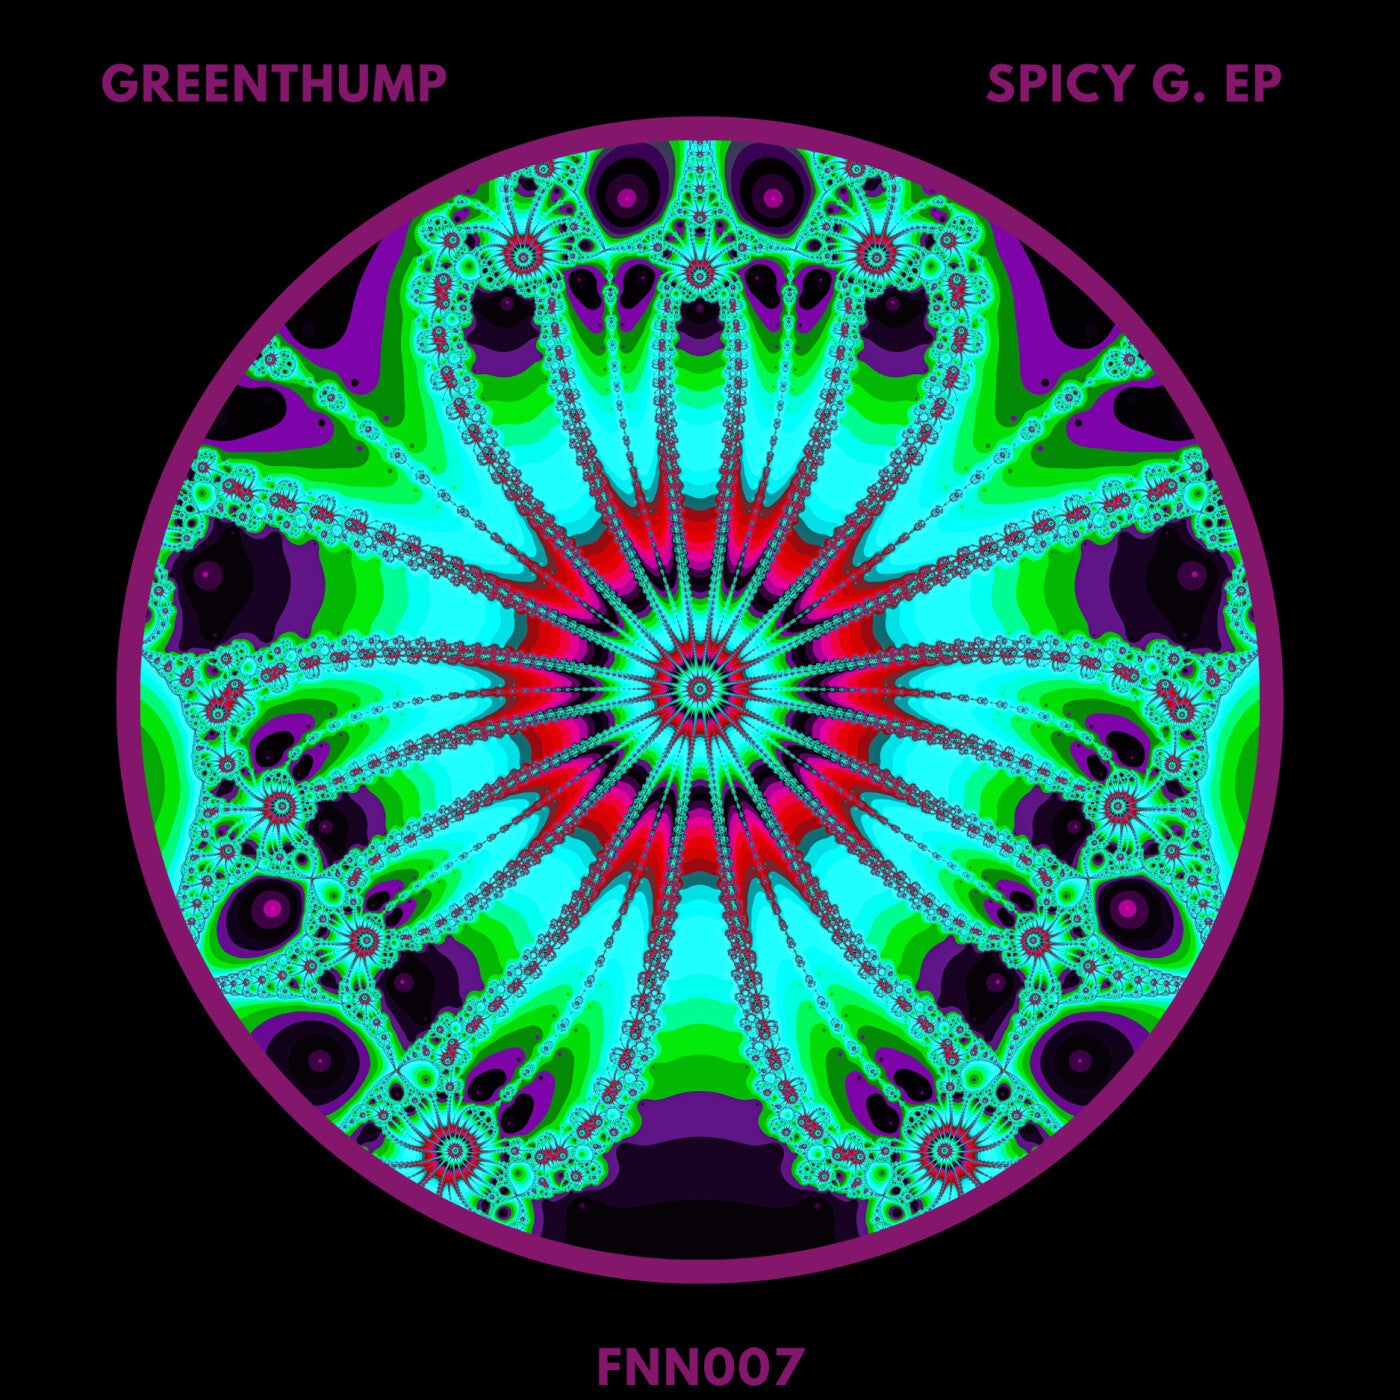 Spicy G. EP